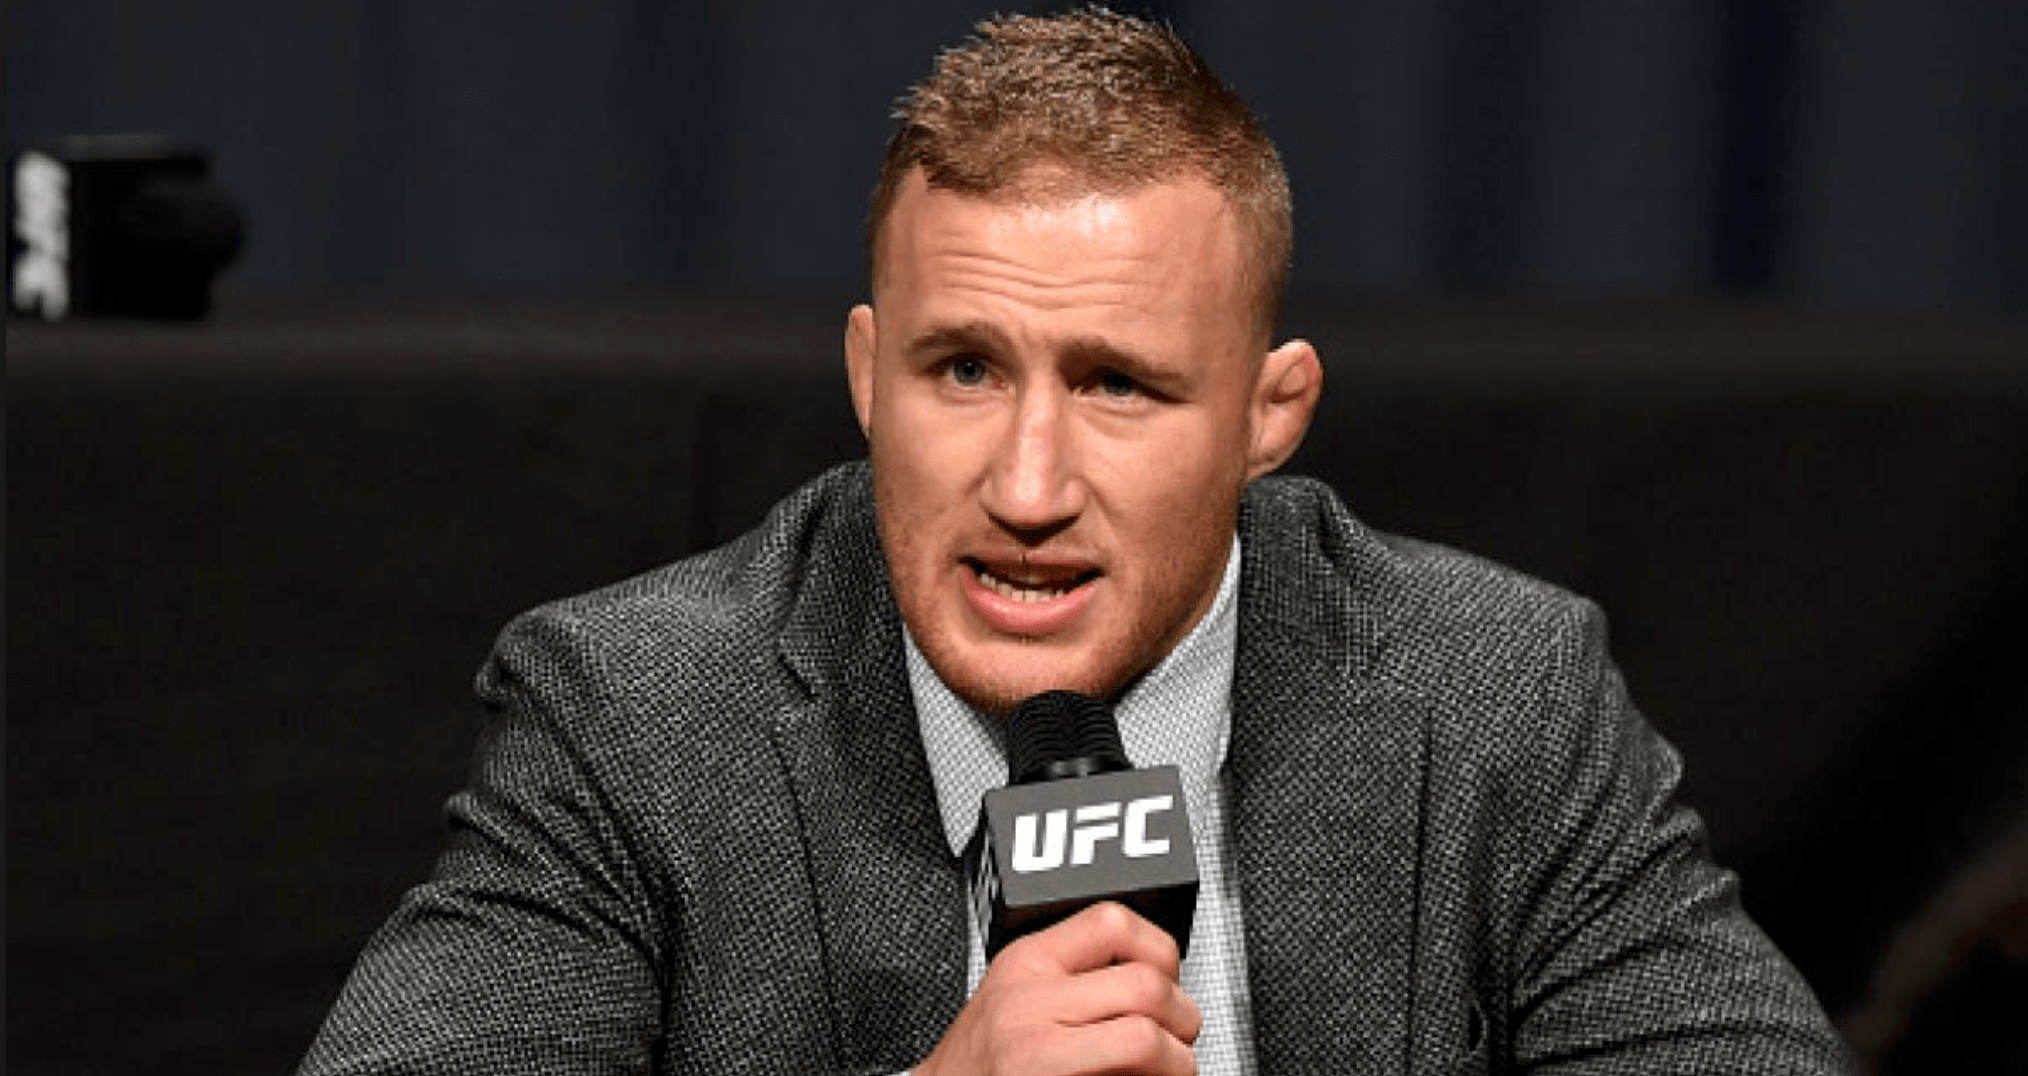 UFC: Justin Gaethje Responds To Dana White’s Recent Comments